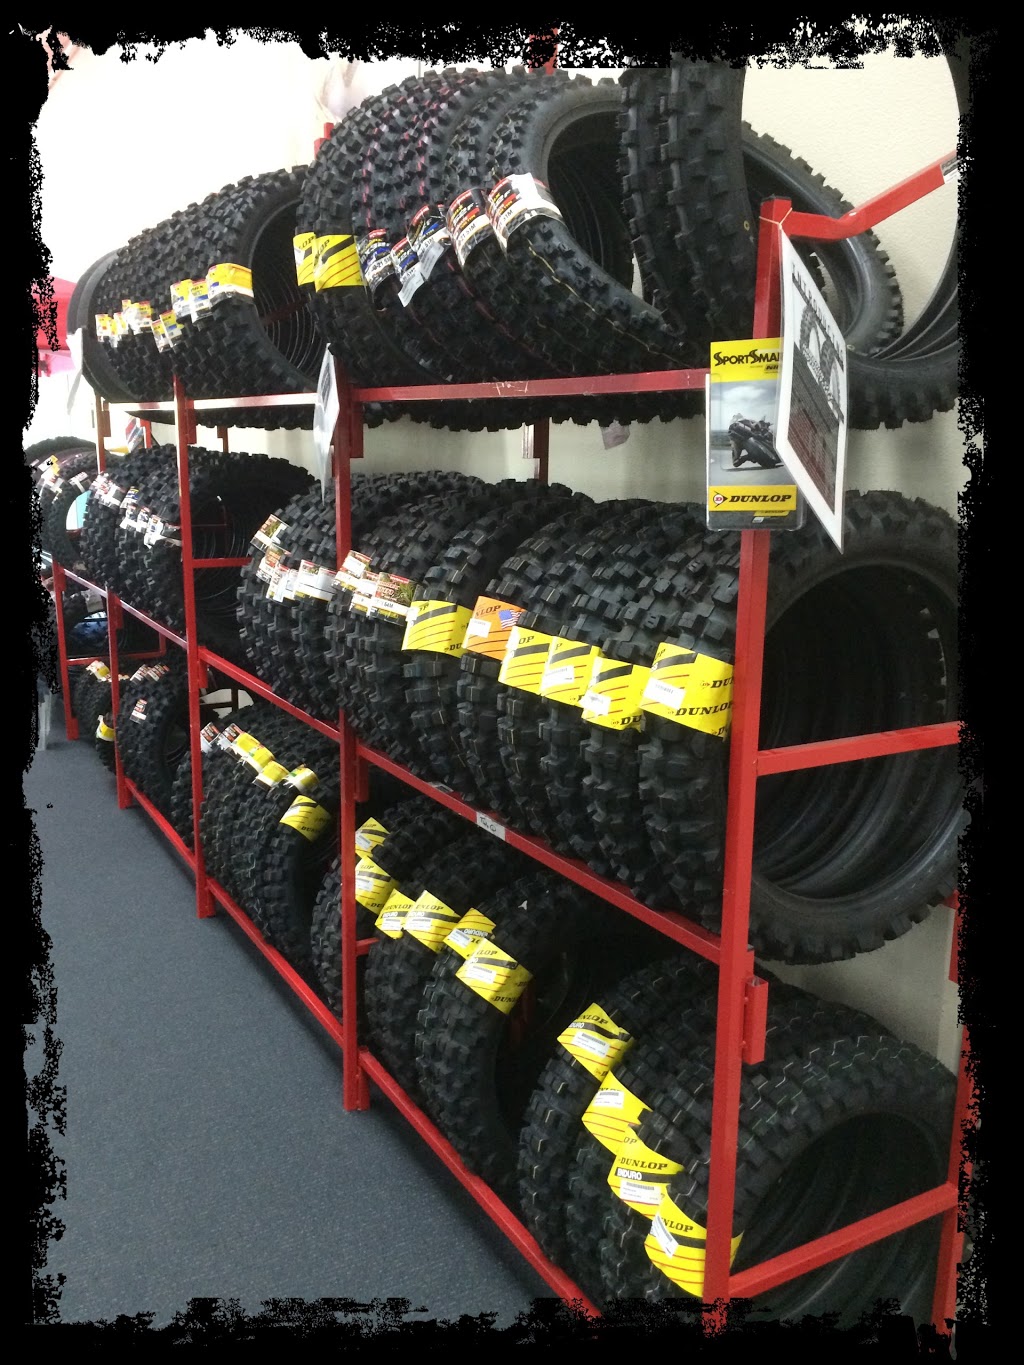 Harbour City Motorcycles | 2 Soppa St, Gladstone Central QLD 4680, Australia | Phone: (07) 4979 0100